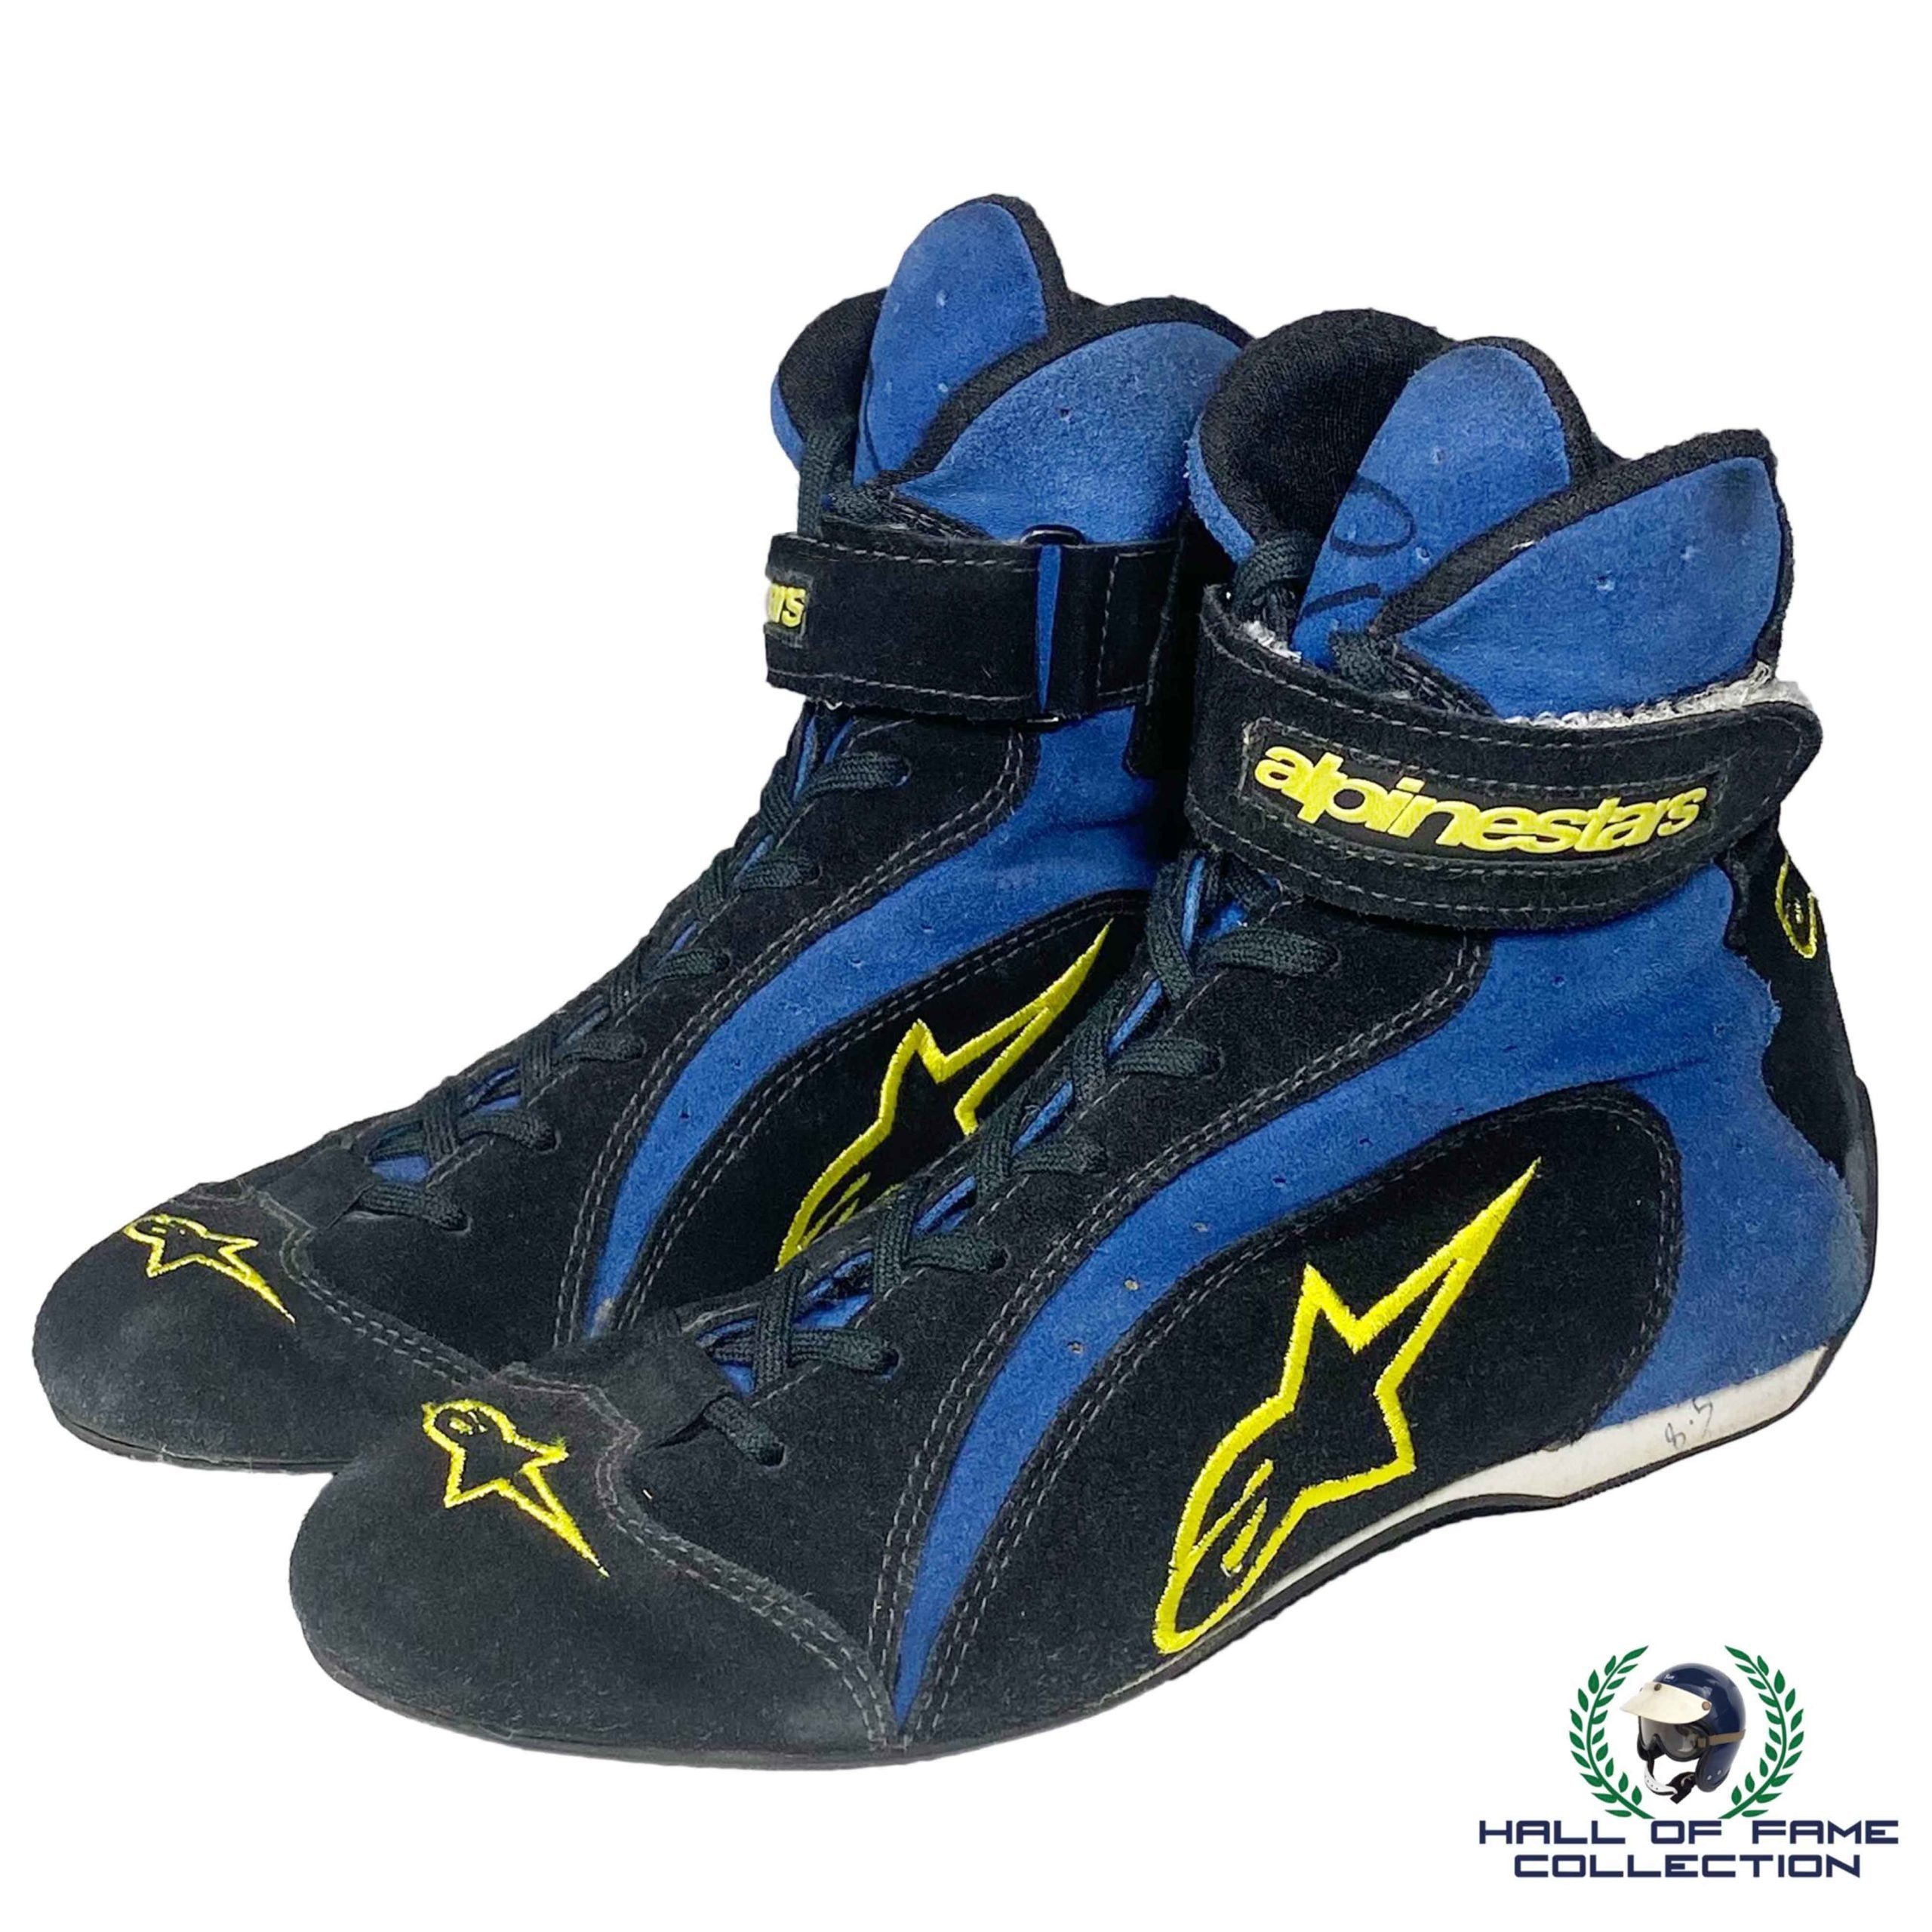 2002 Jenson Button Signed Race Used Renault Alpinestars F1 Boots